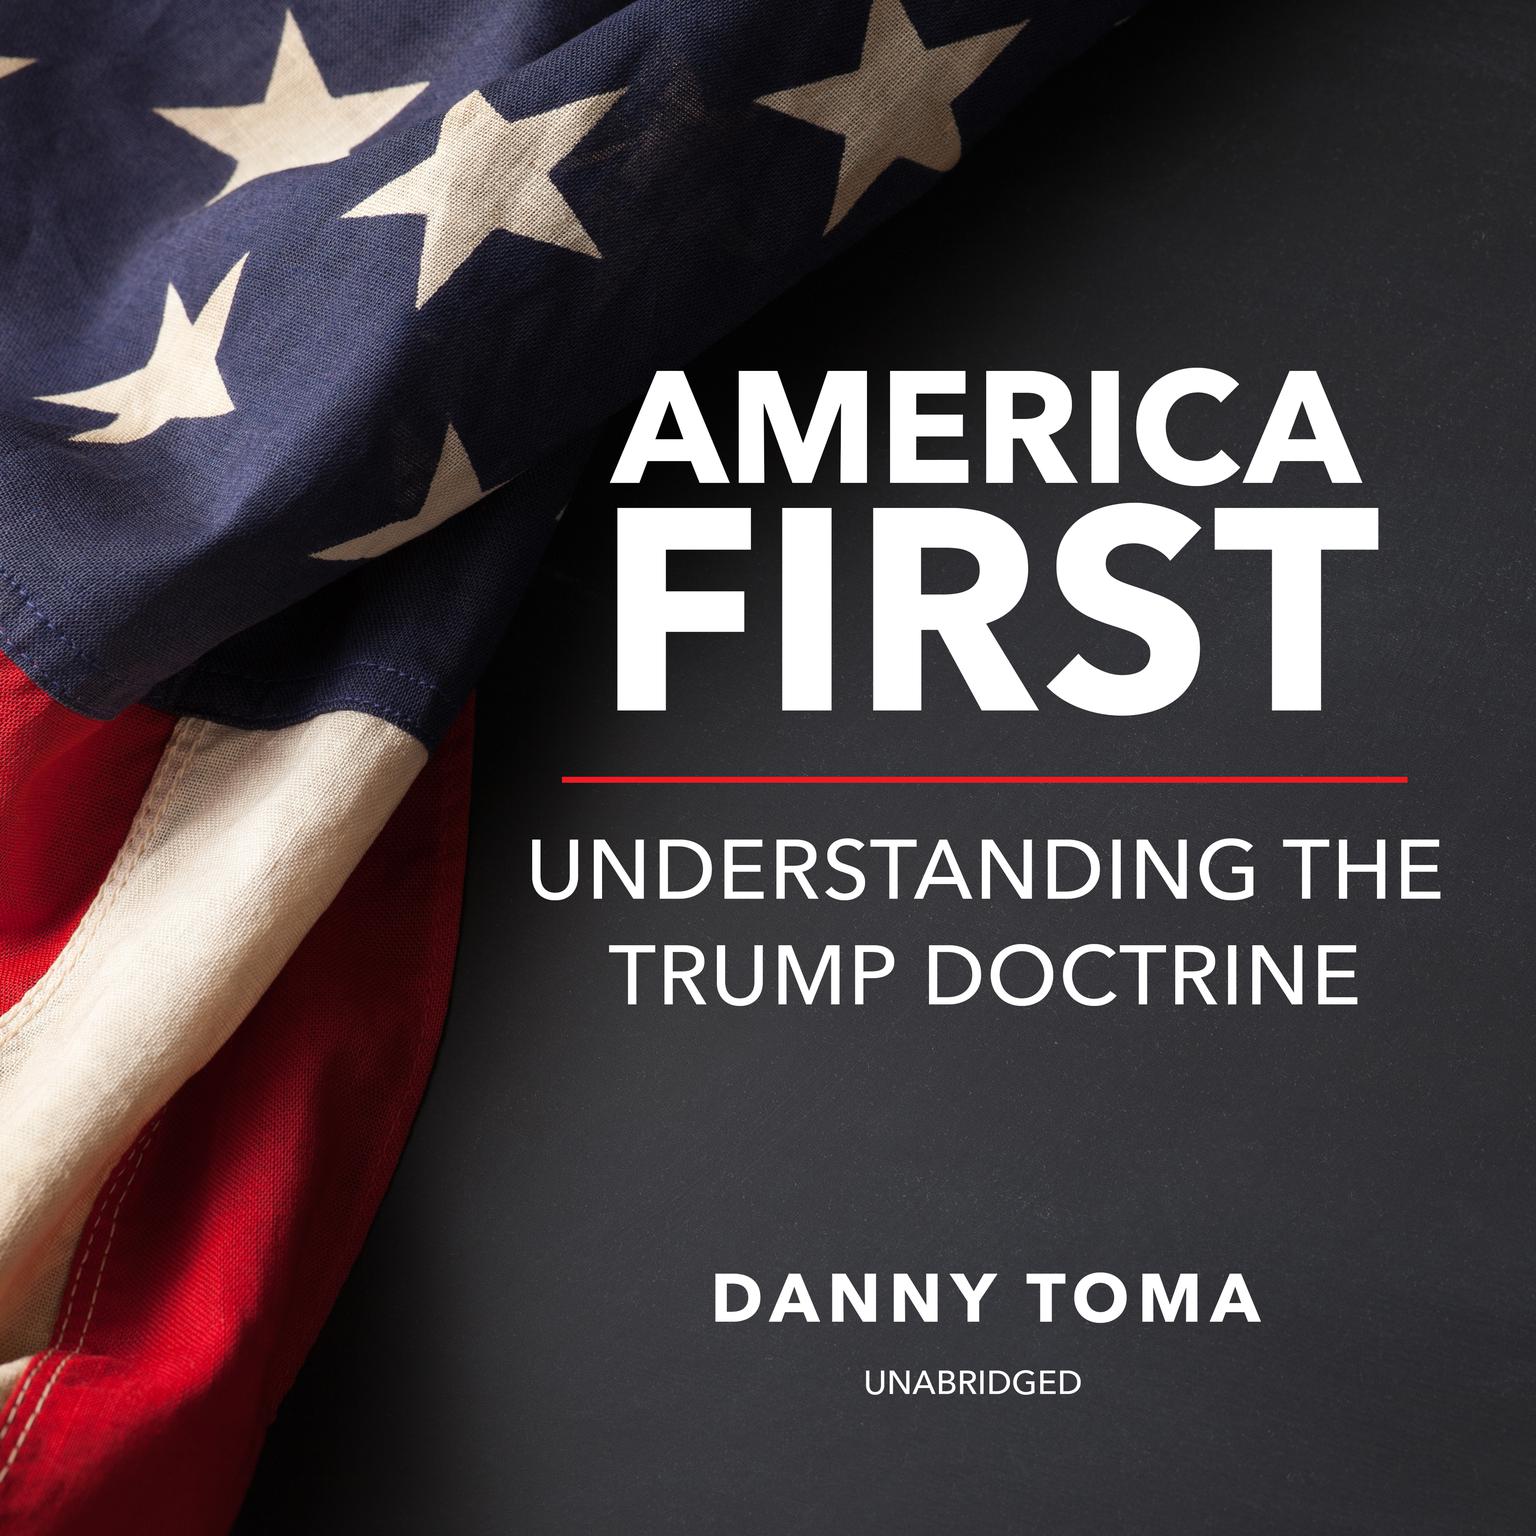 America First: Understanding the Trump Doctrine Audiobook, by Danny Toma